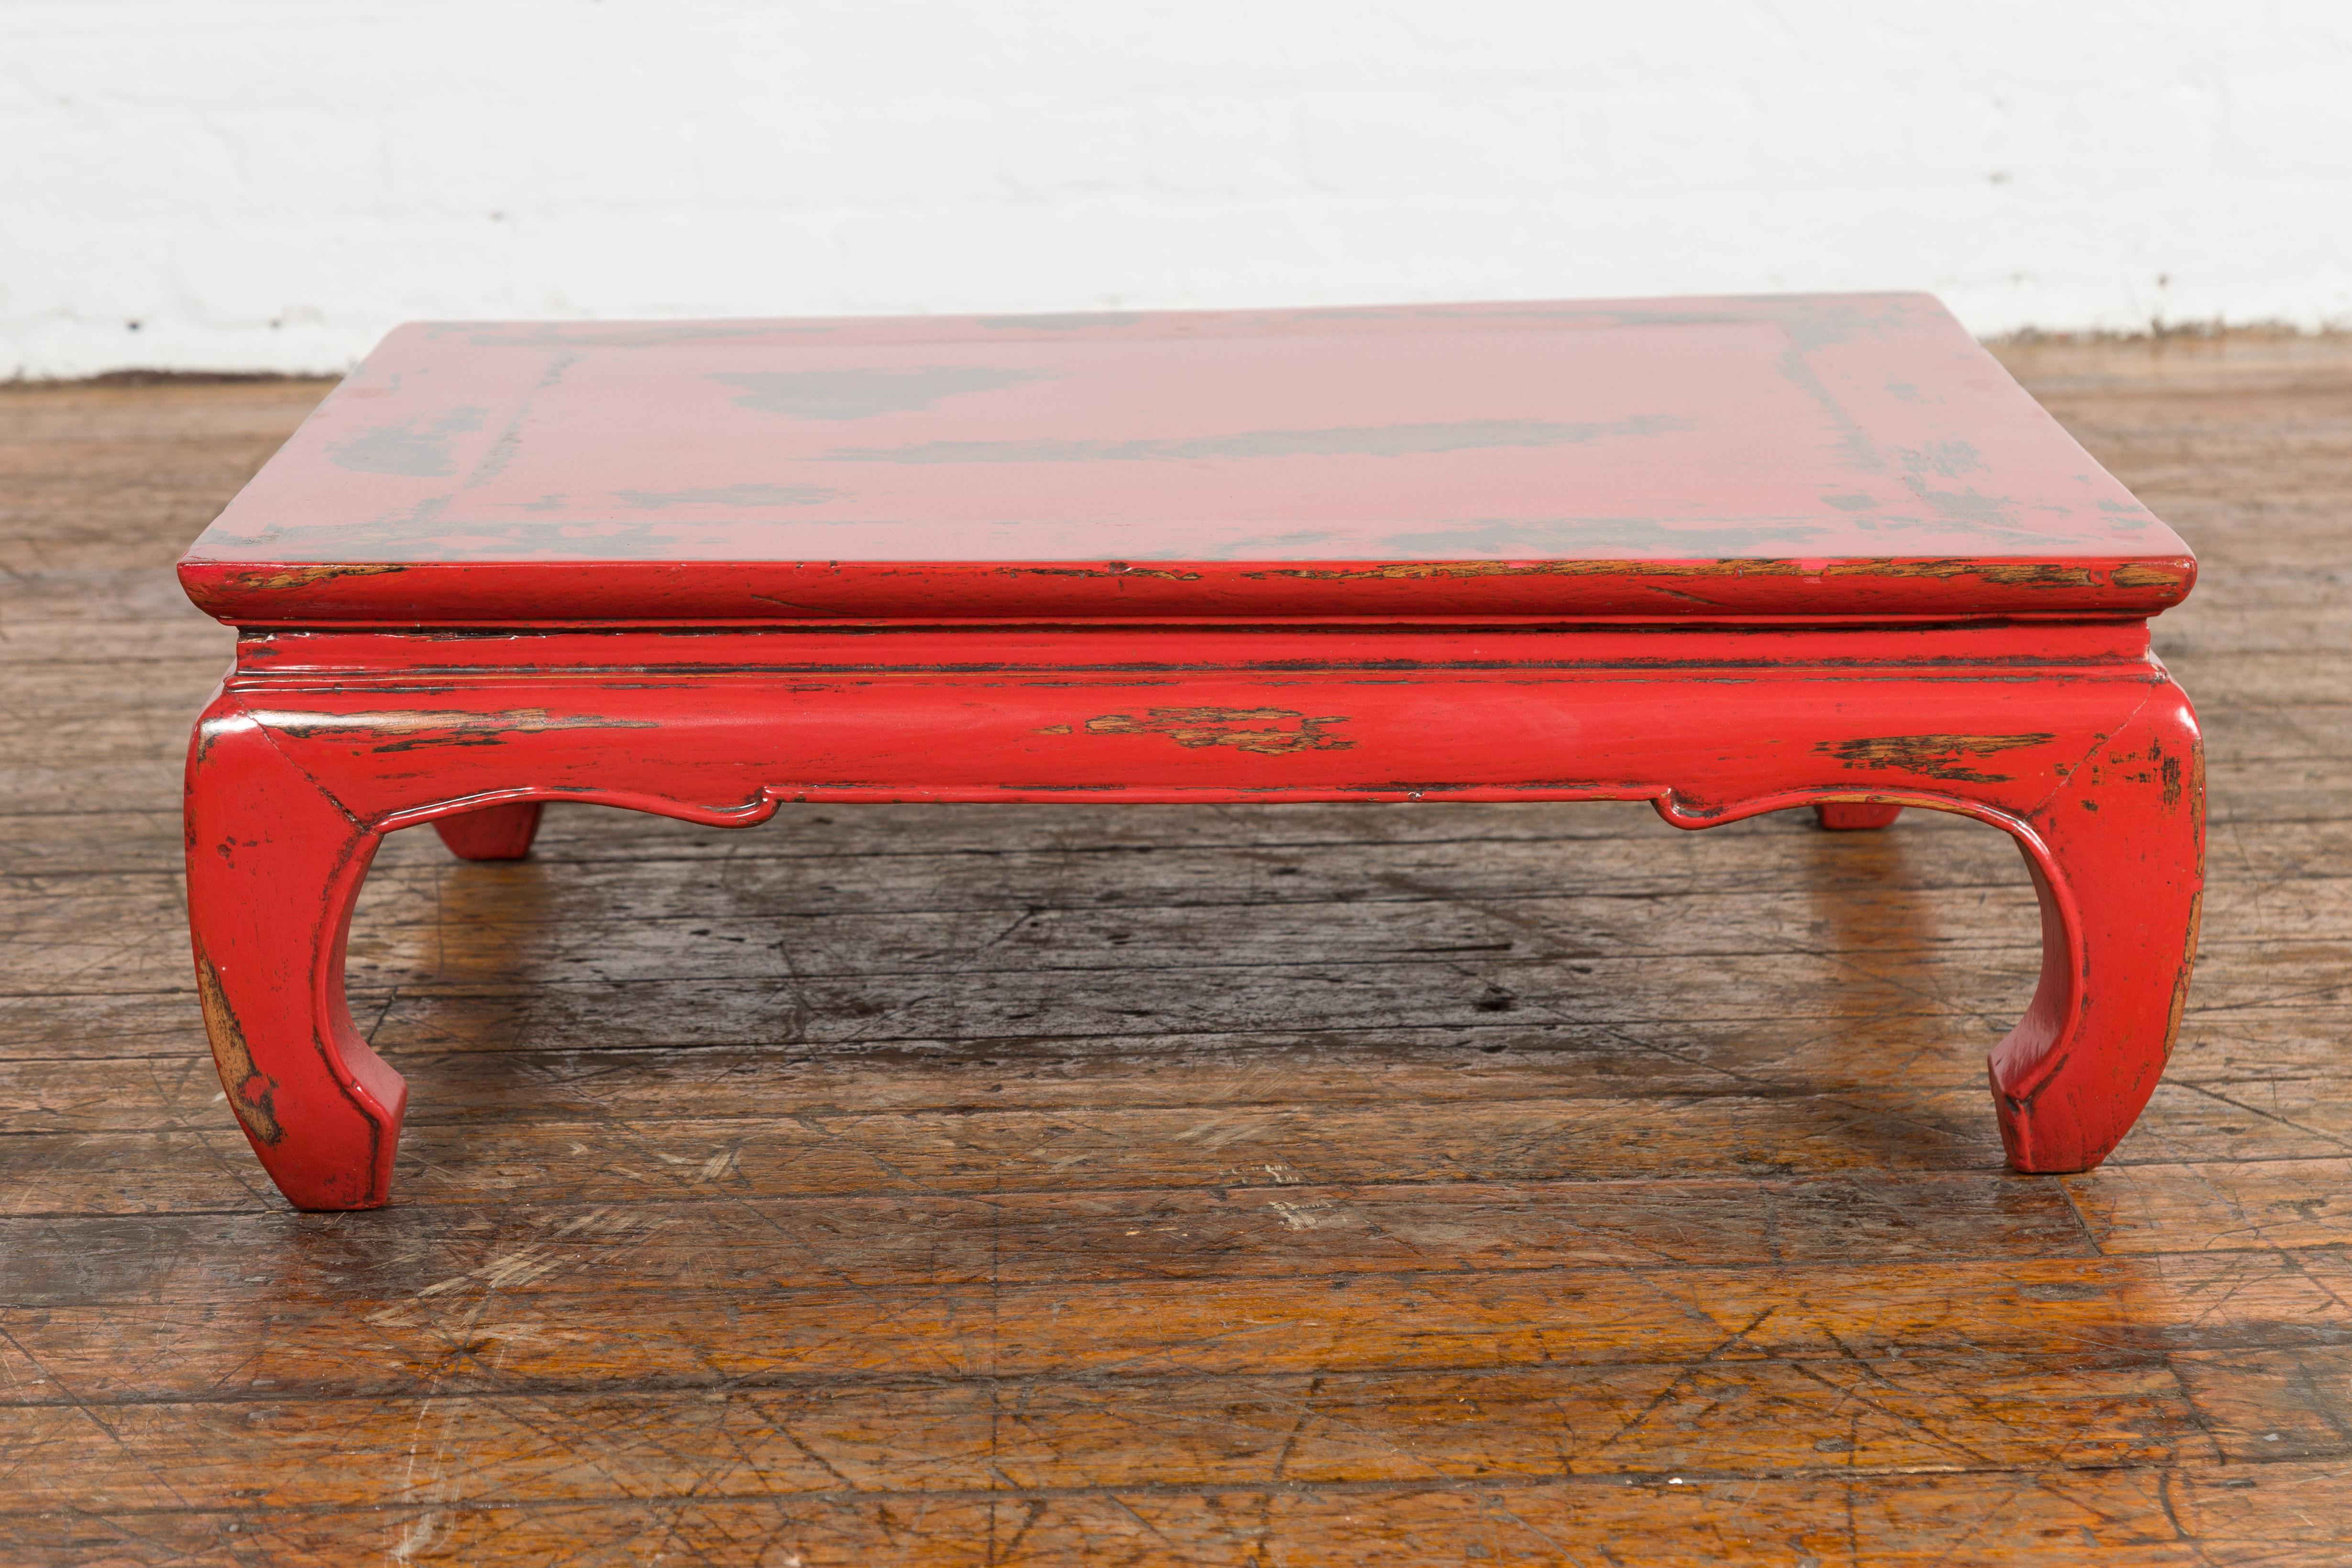 A Chinese Qing Dynasty period low Kang table from the 19th century, with chow legs, carved apron and restored with custom red distressed lacquer. Created in China during the Qing Dynasty period in the 19th century, this low kang table will make for